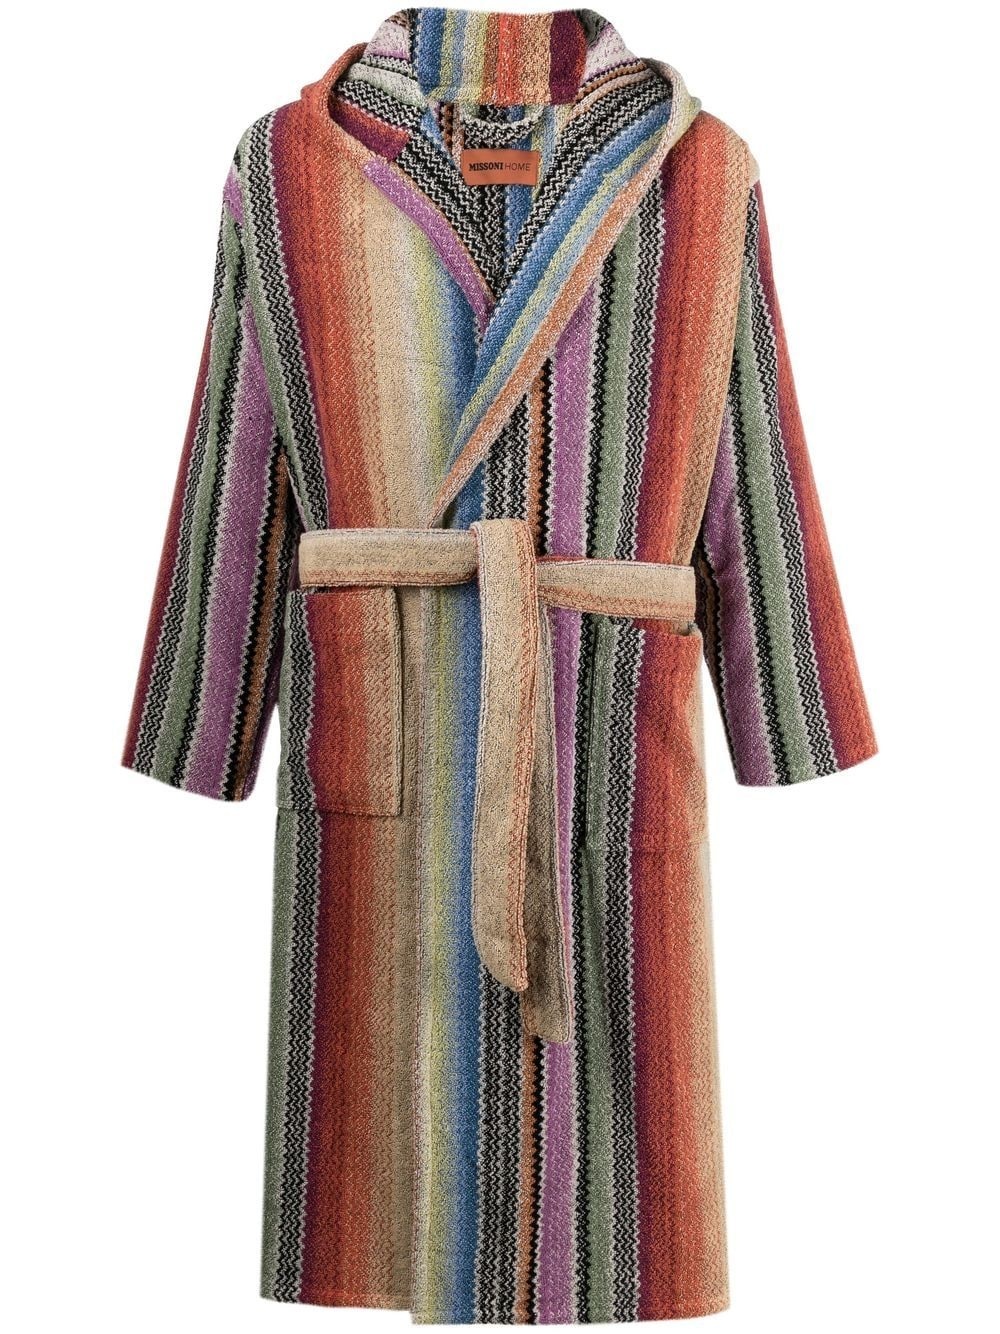 Archie zigzag pattern hooded robe - 1